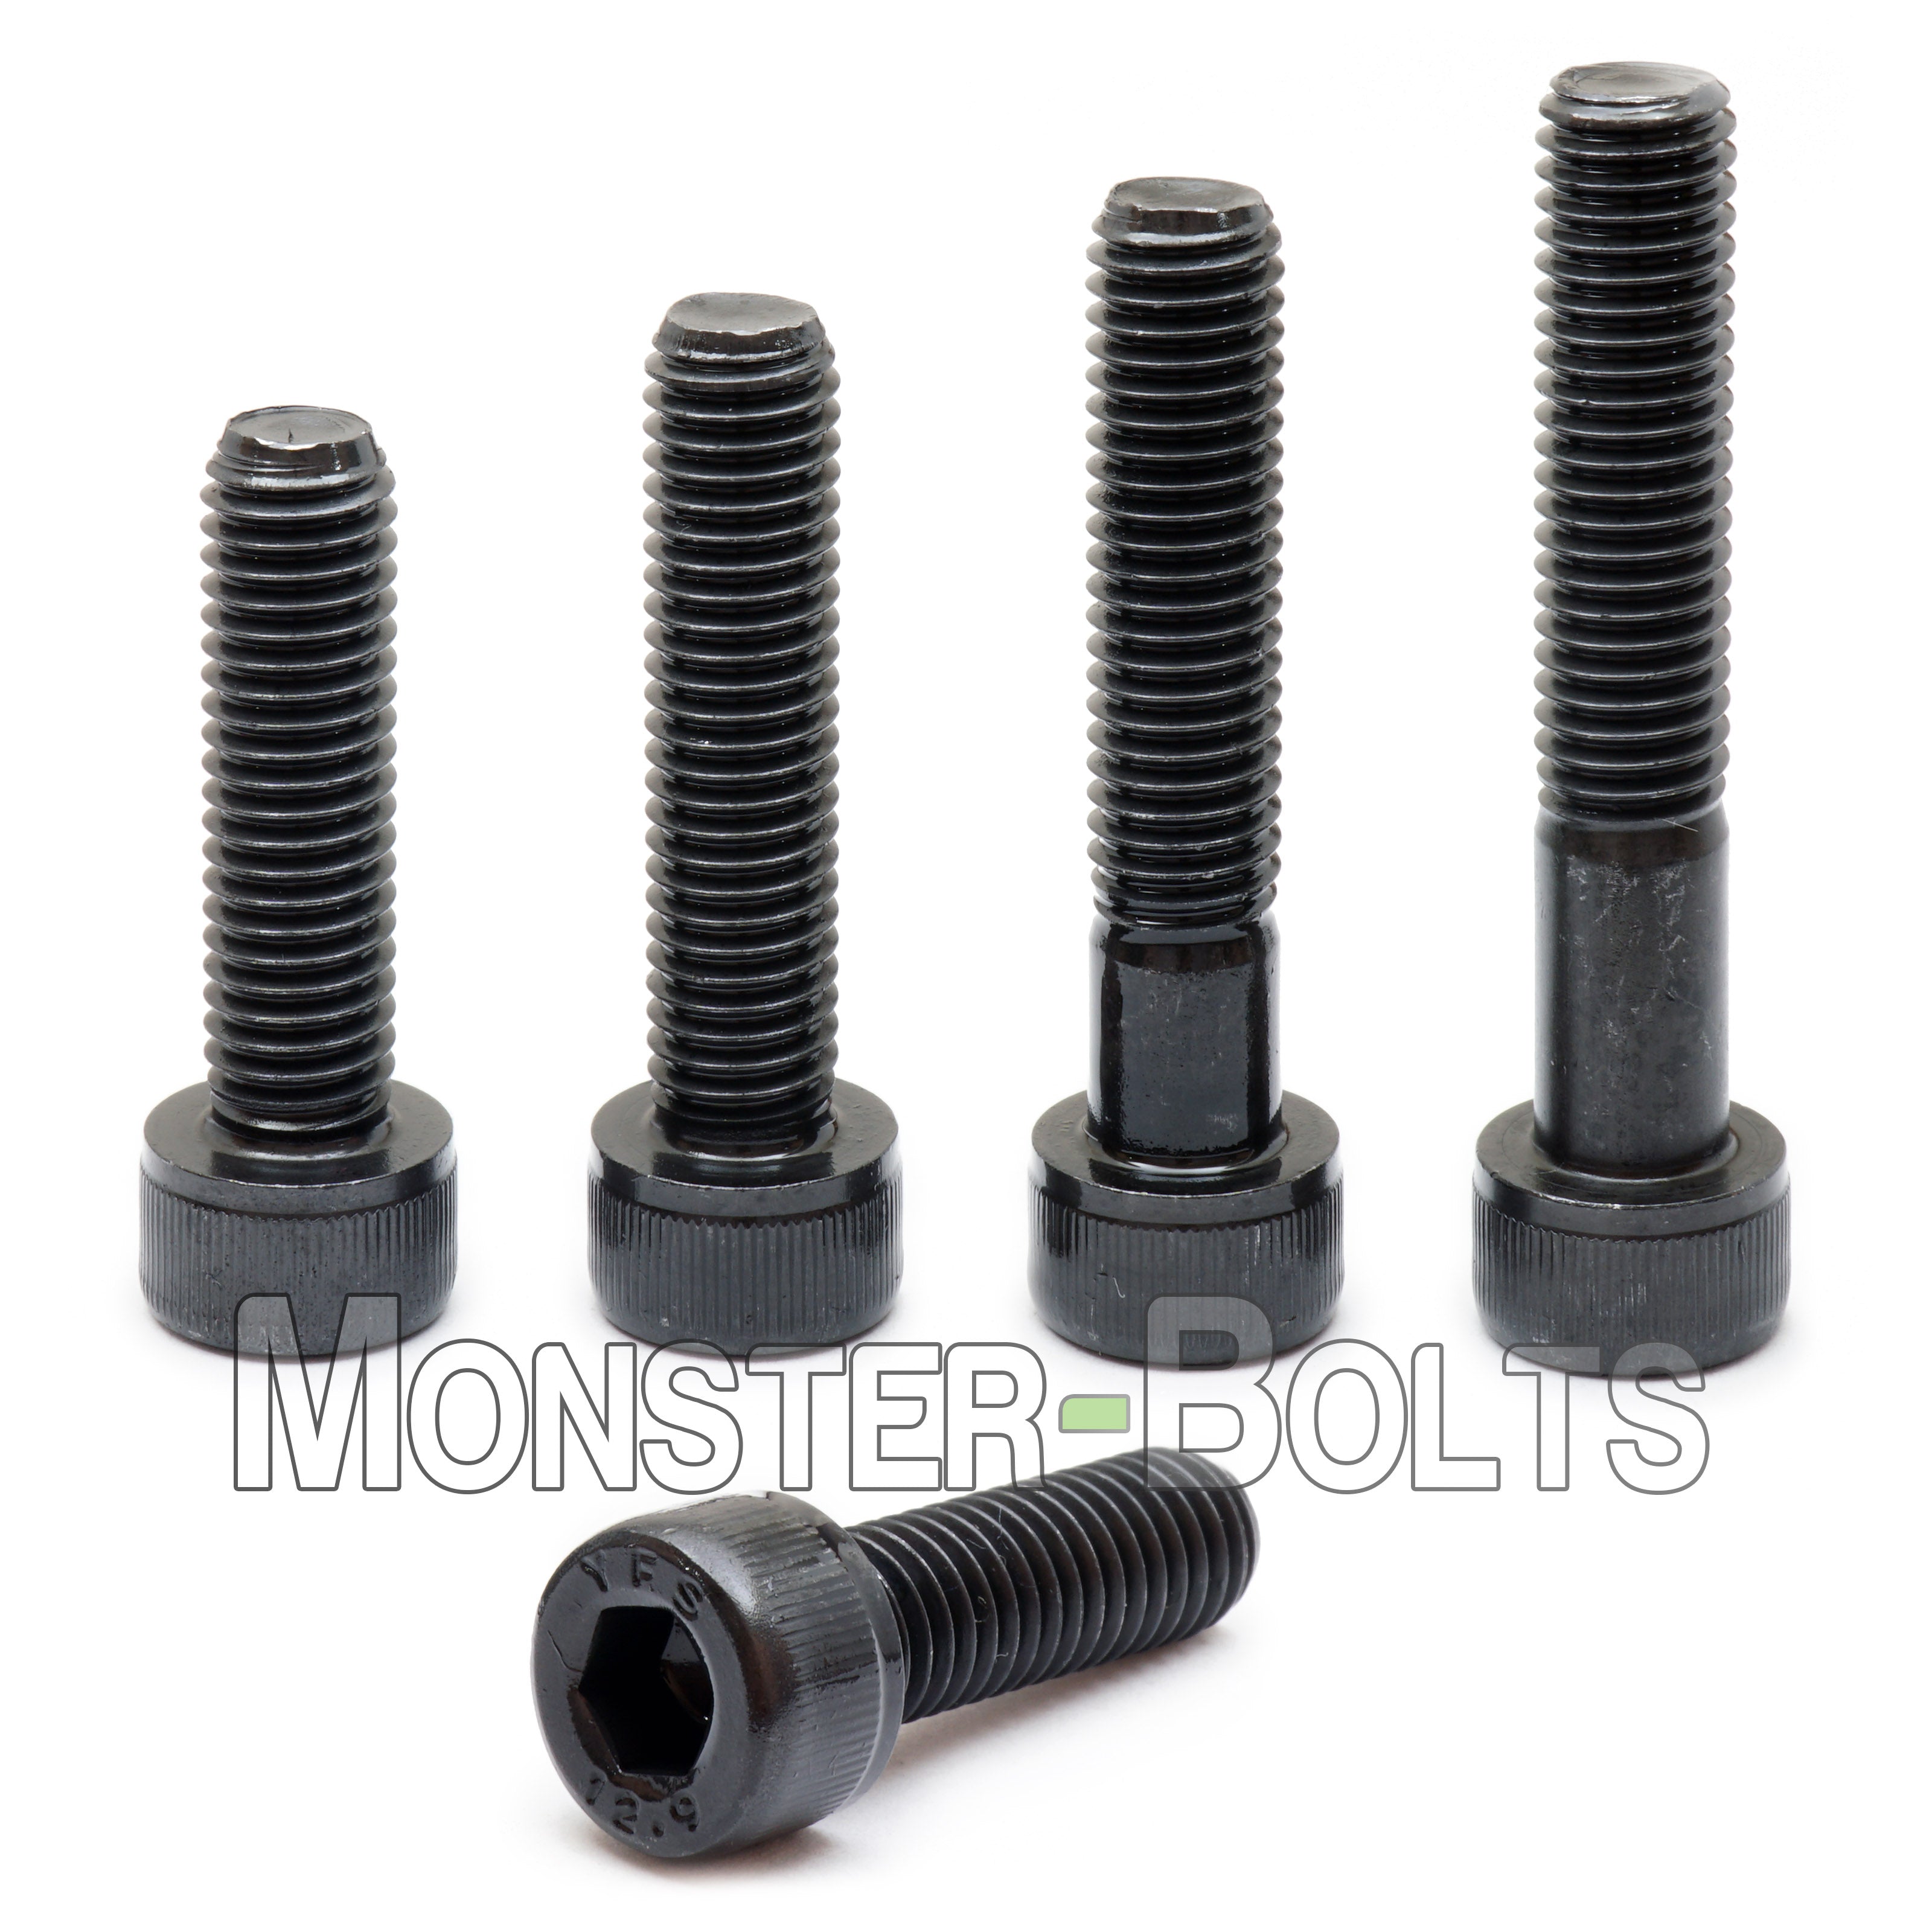 4-40x1 1/4 Mounting Bolts & Blind Nuts 4 sets/pkg